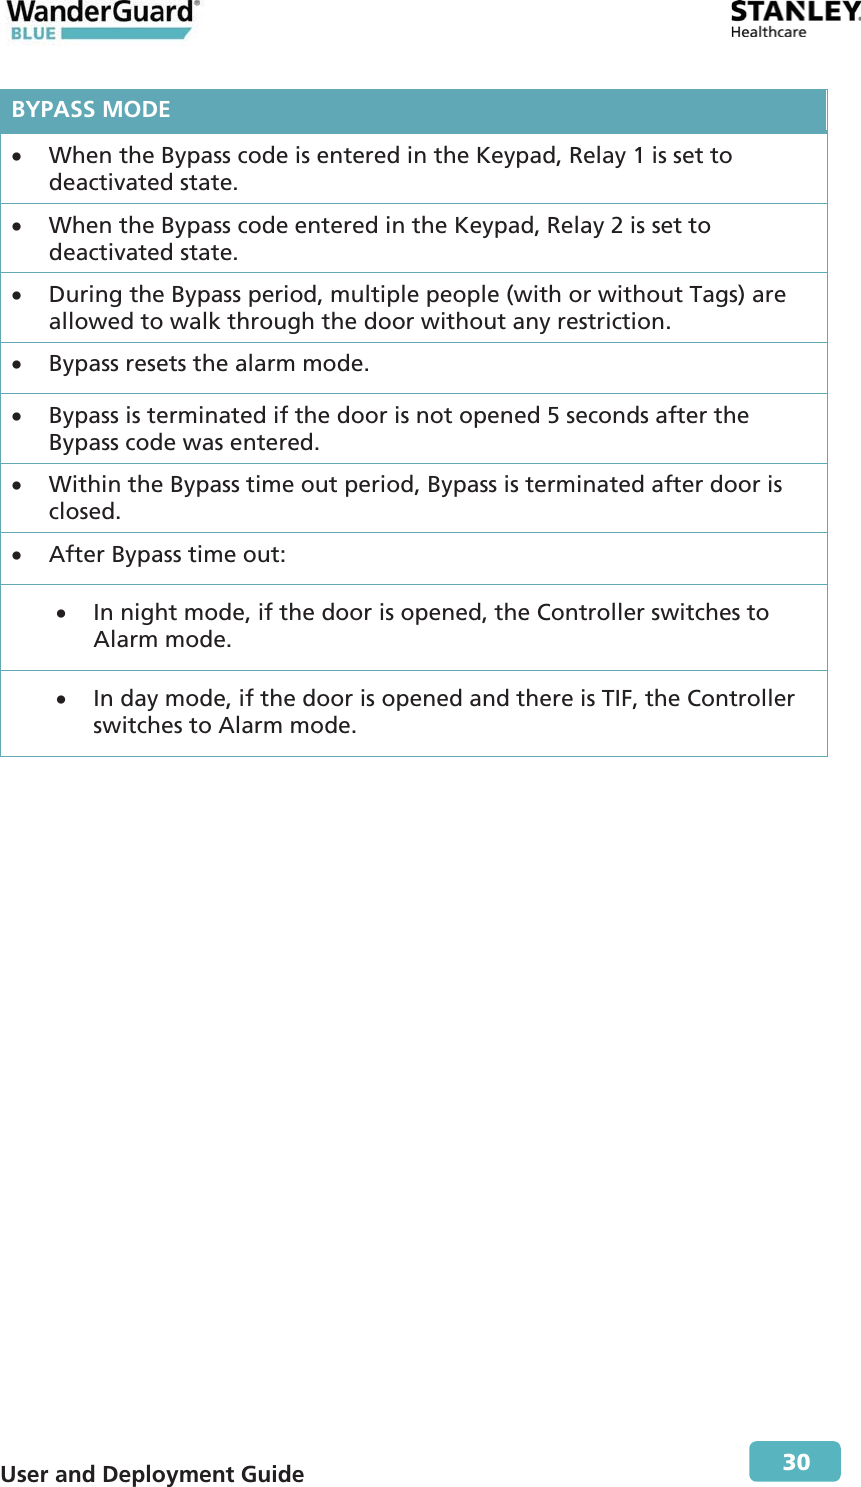  User and Deployment Guide        30 BYPASS MODEx When the Bypass code is entered in the Keypad, Relay 1 is set to deactivated state. x When the Bypass code entered in the Keypad, Relay 2 is set to deactivated state. x During the Bypass period, multiple people (with or without Tags) are allowed to walk through the door without any restriction. x Bypass resets the alarm mode. x Bypass is terminated if the door is not opened 5 seconds after the Bypass code was entered. x Within the Bypass time out period, Bypass is terminated after door is closed. x After Bypass time out: x In night mode, if the door is opened, the Controller switches to Alarm mode. x In day mode, if the door is opened and there is TIF, the Controller switches to Alarm mode. 